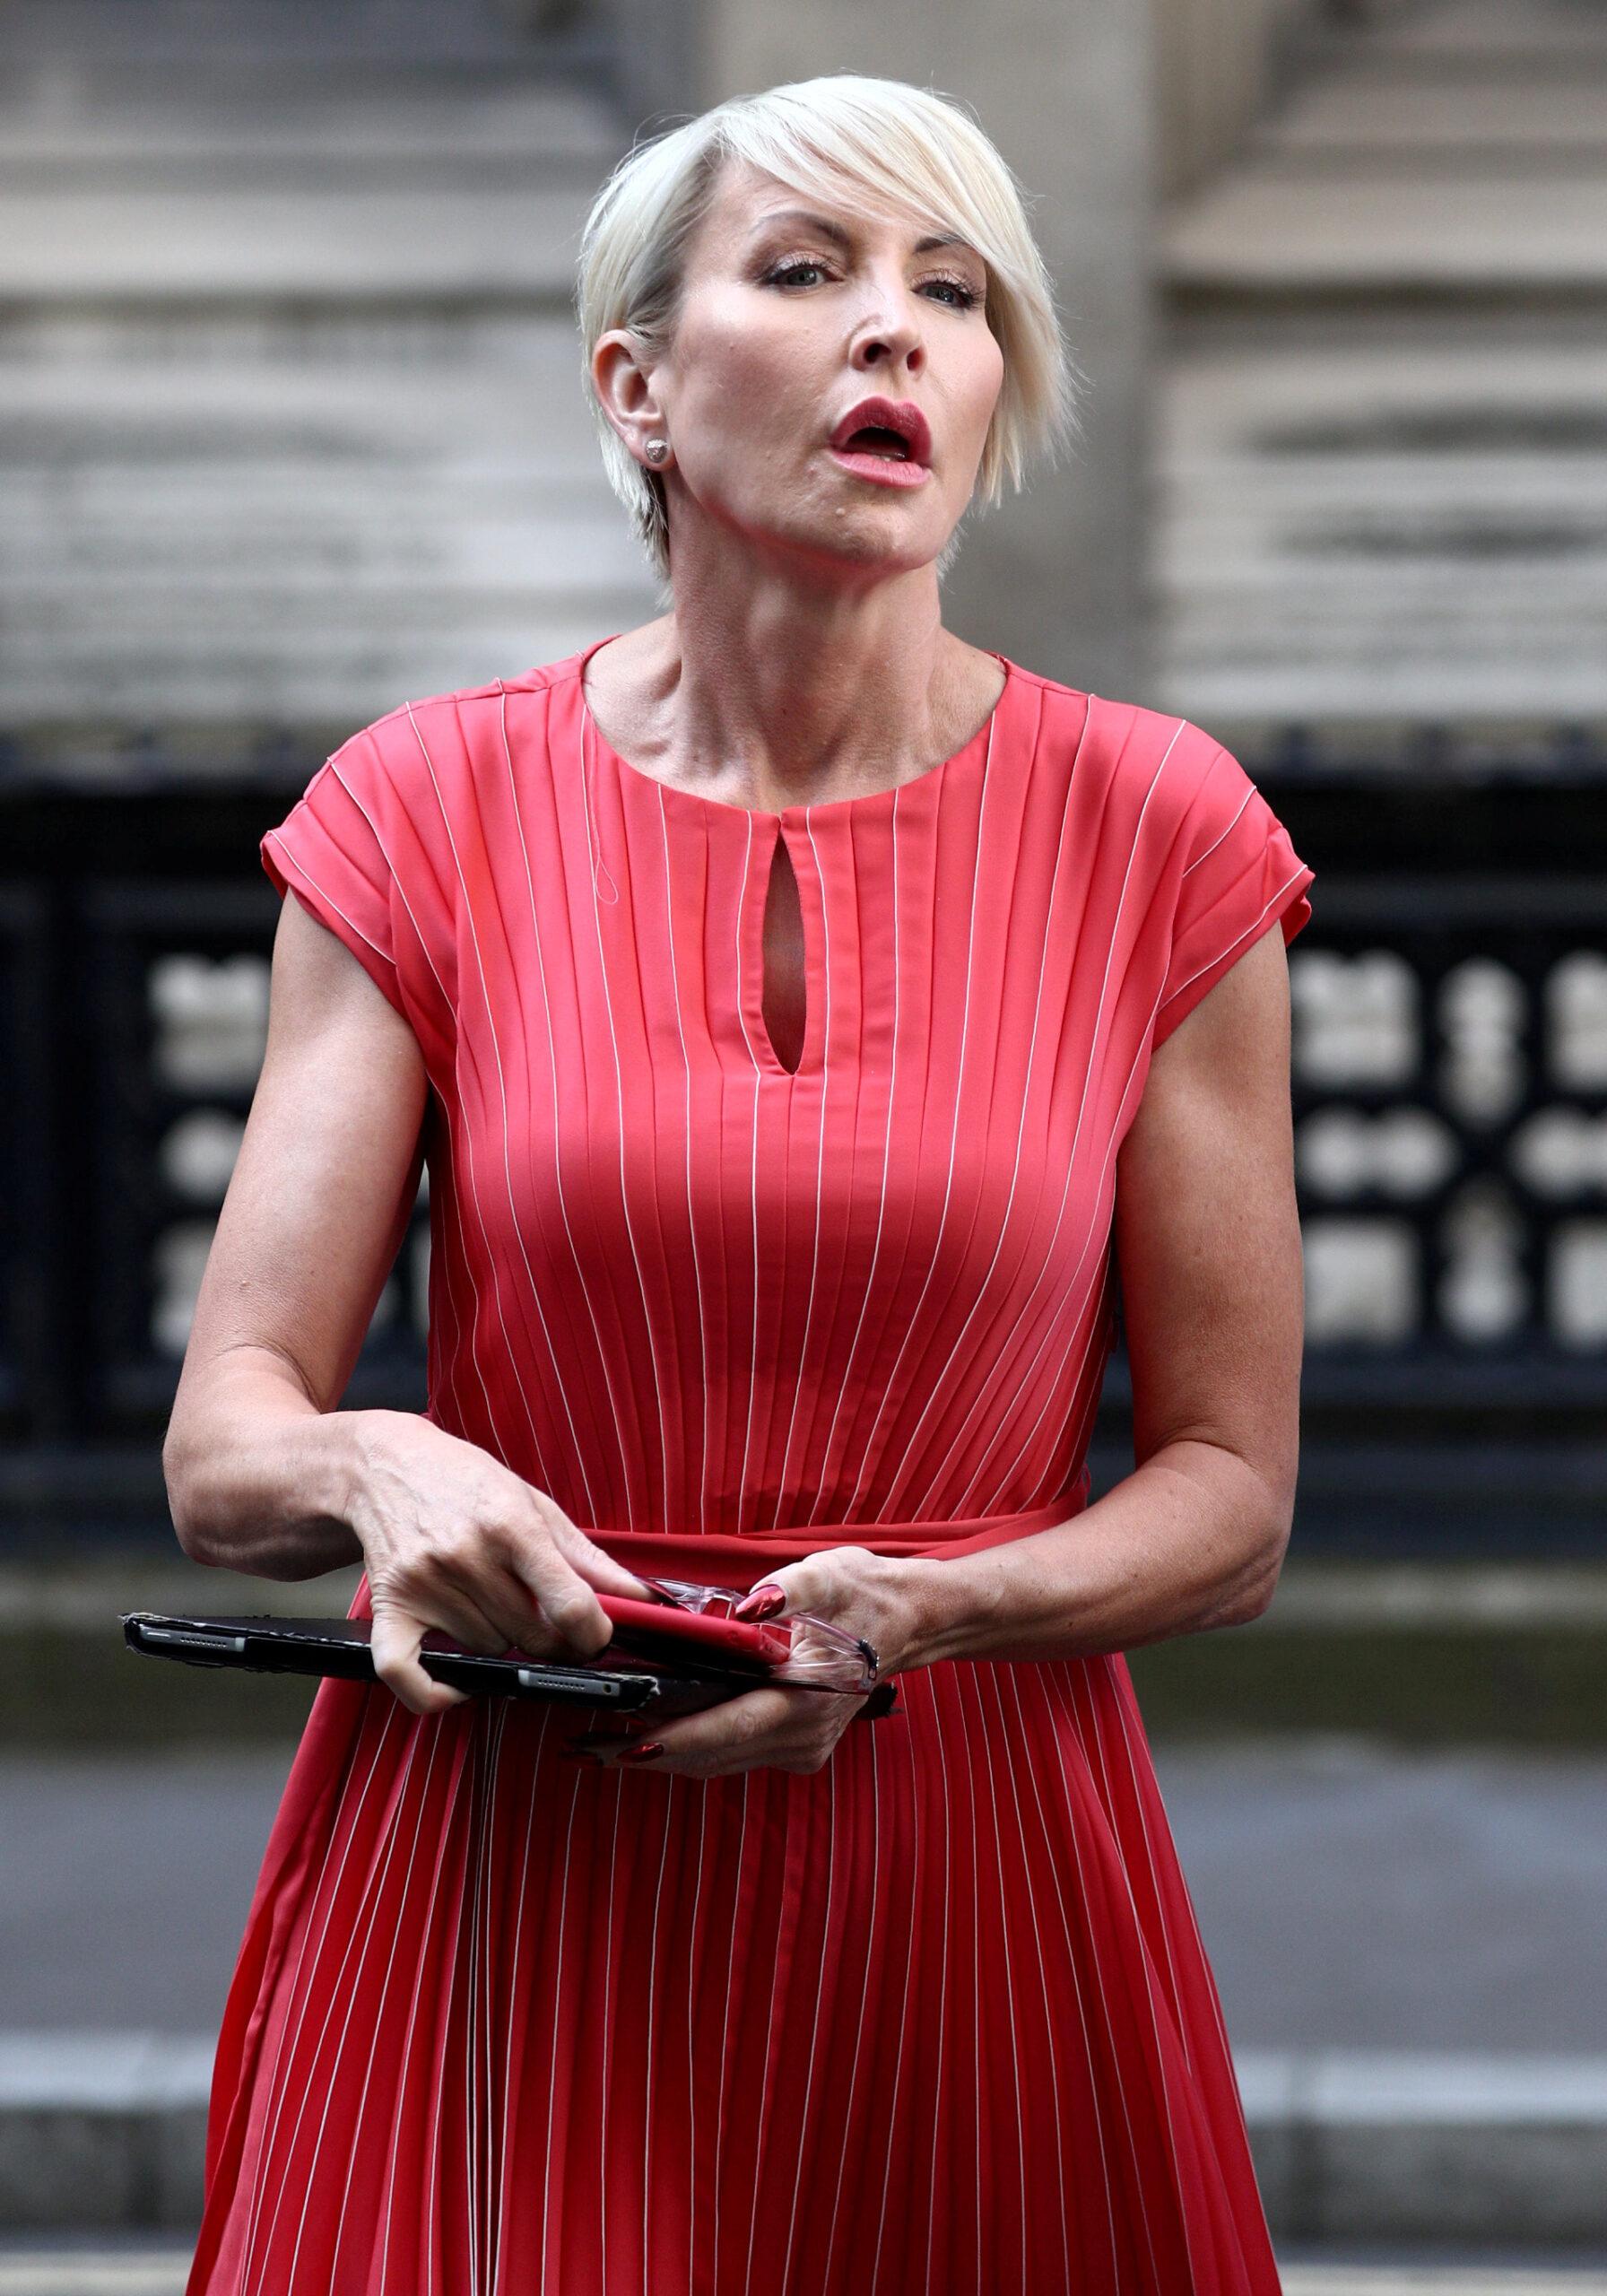 Heather Mills is seen outside the High Court where she is expecting to receive a public apology from News Group Newspapers after bringing a claim of phone hacking July 8 2019